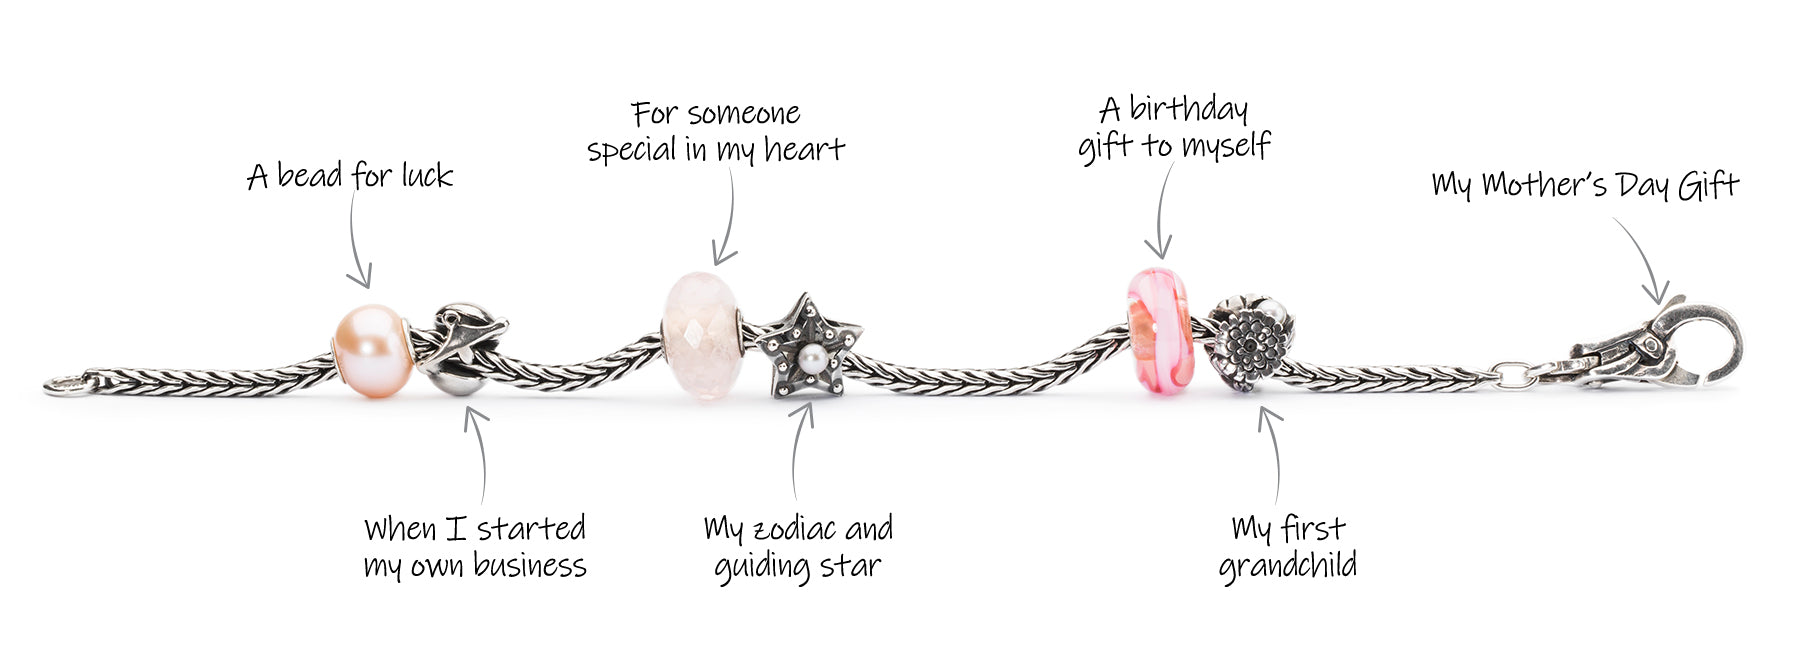 An illustration of a Trollbeads necklace showing different milestones associated with different beads.